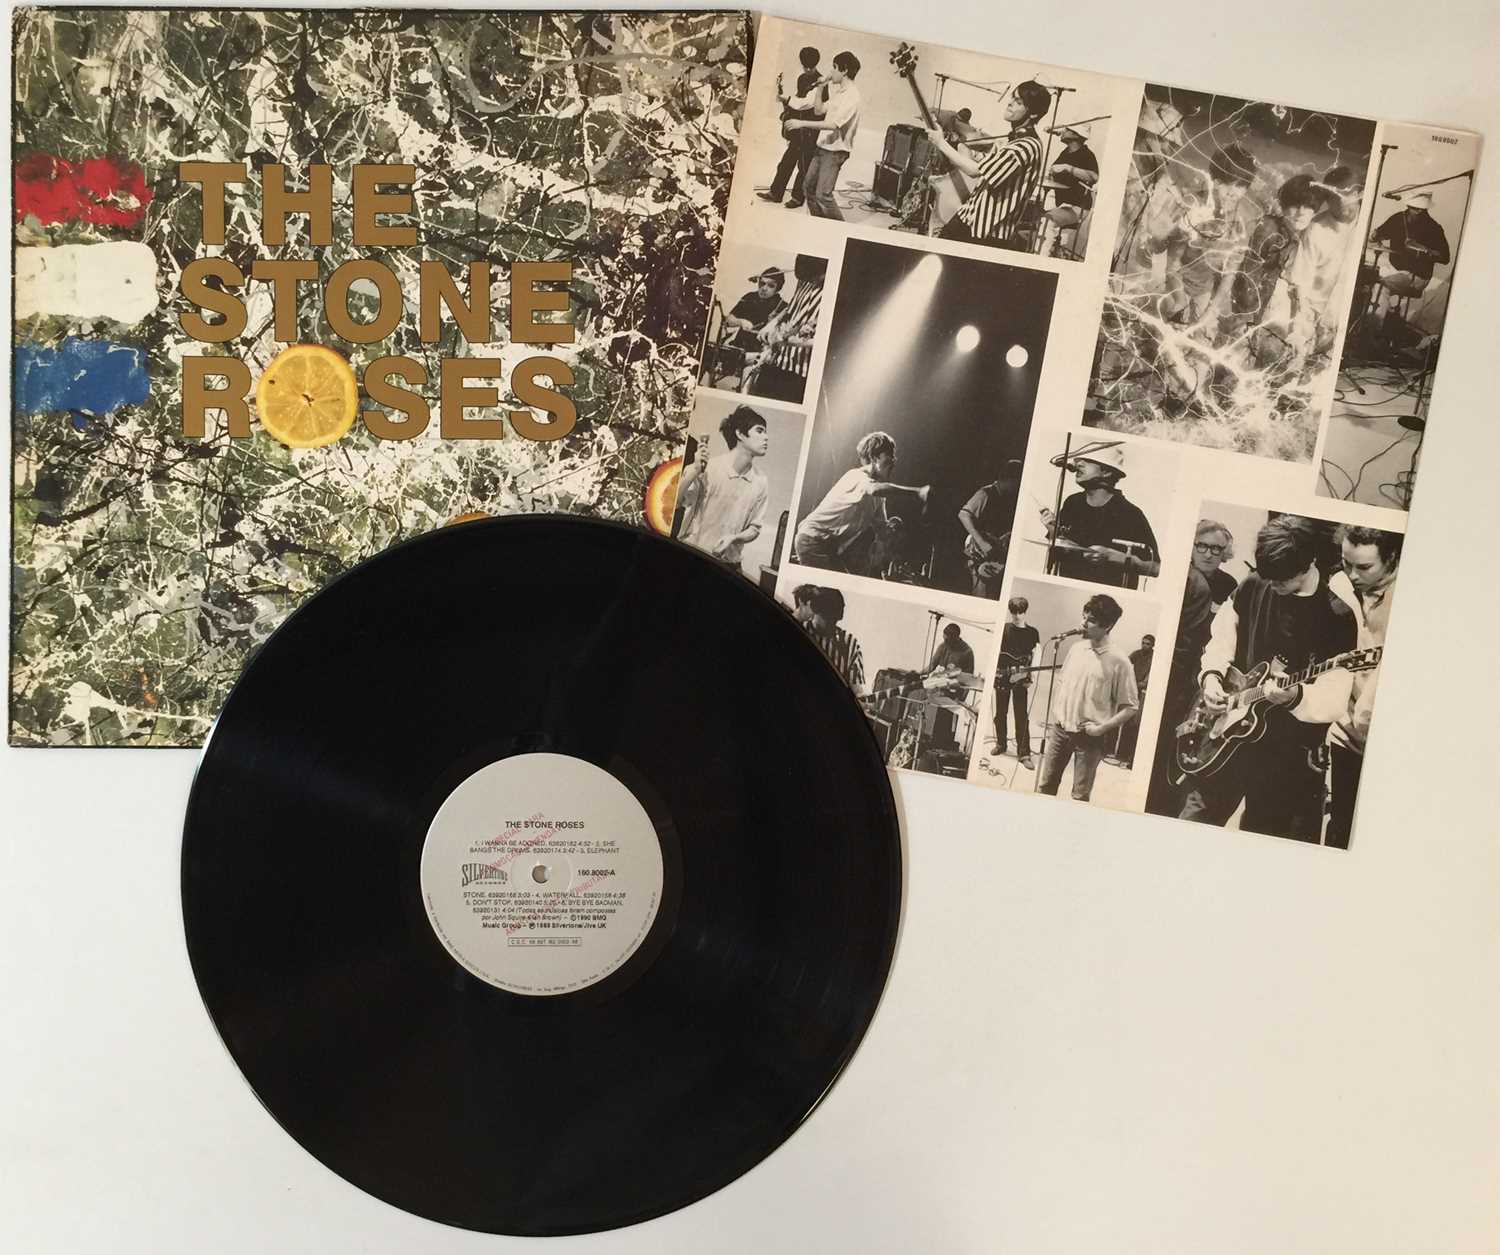 THE STONE ROSES - THE STONE ROSES LPs (LIMITED EDITION UK/EU REISSUES) - Image 7 of 8